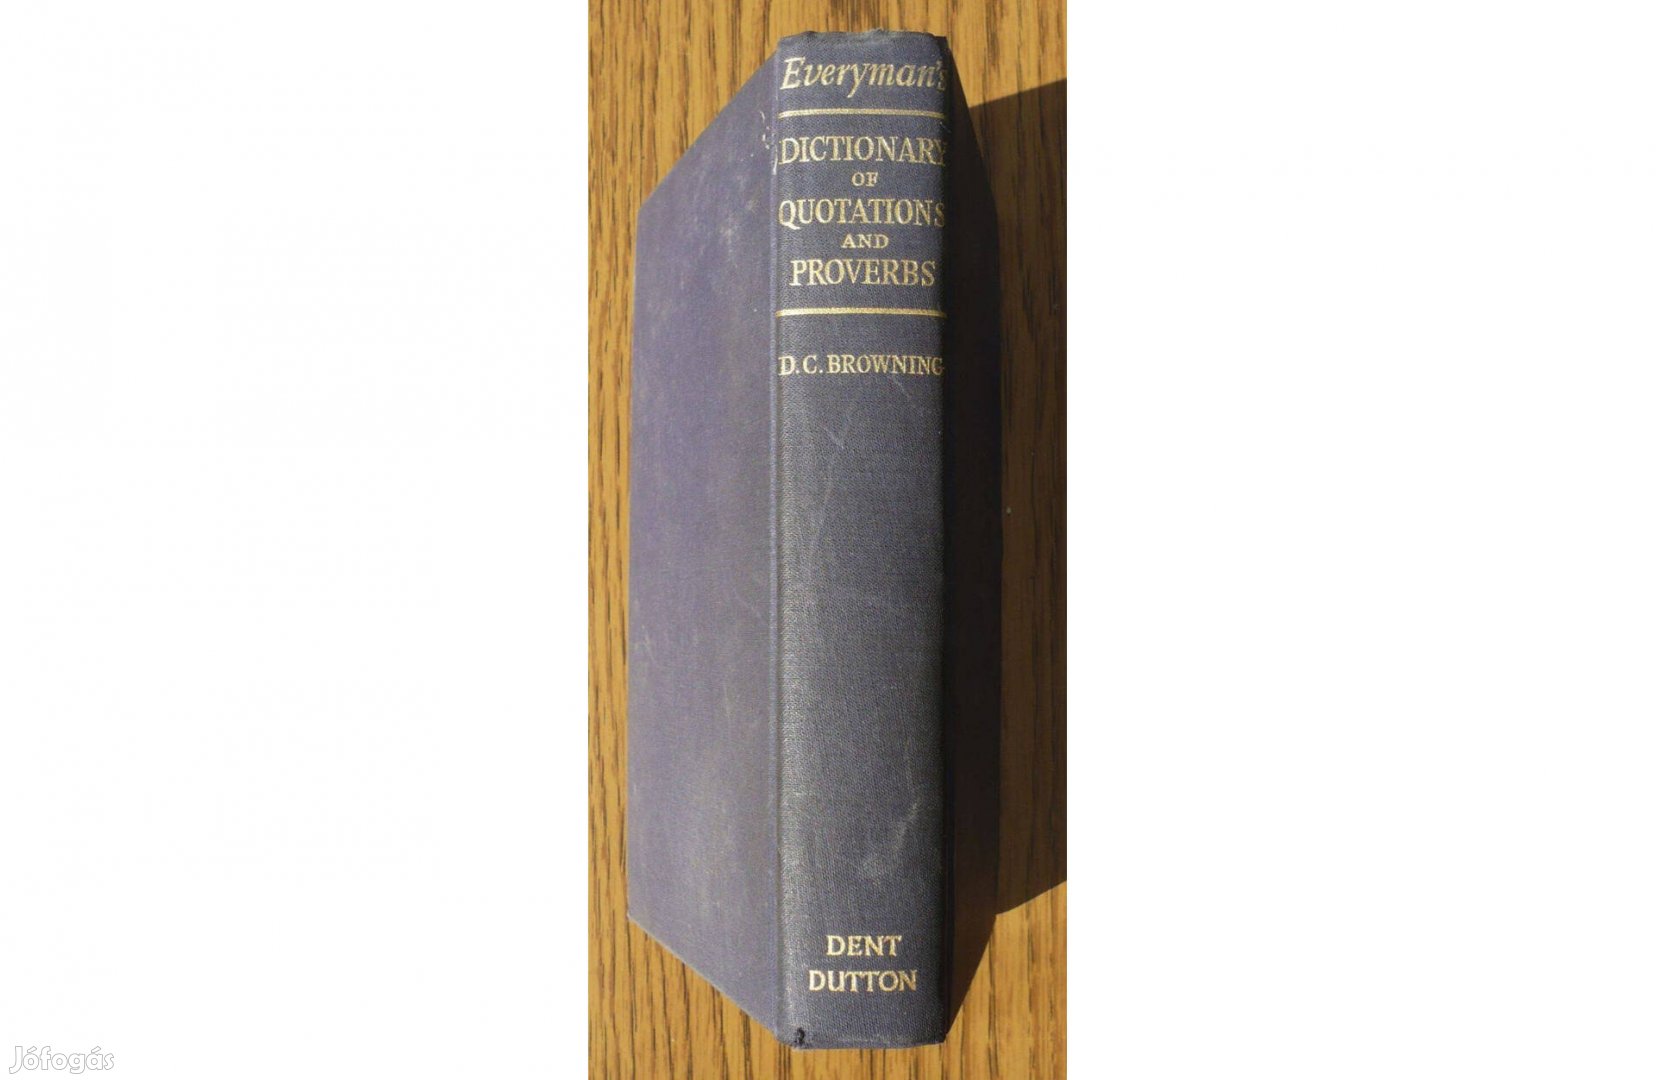 Everyman's Dictionary of Quotations and Proverbs